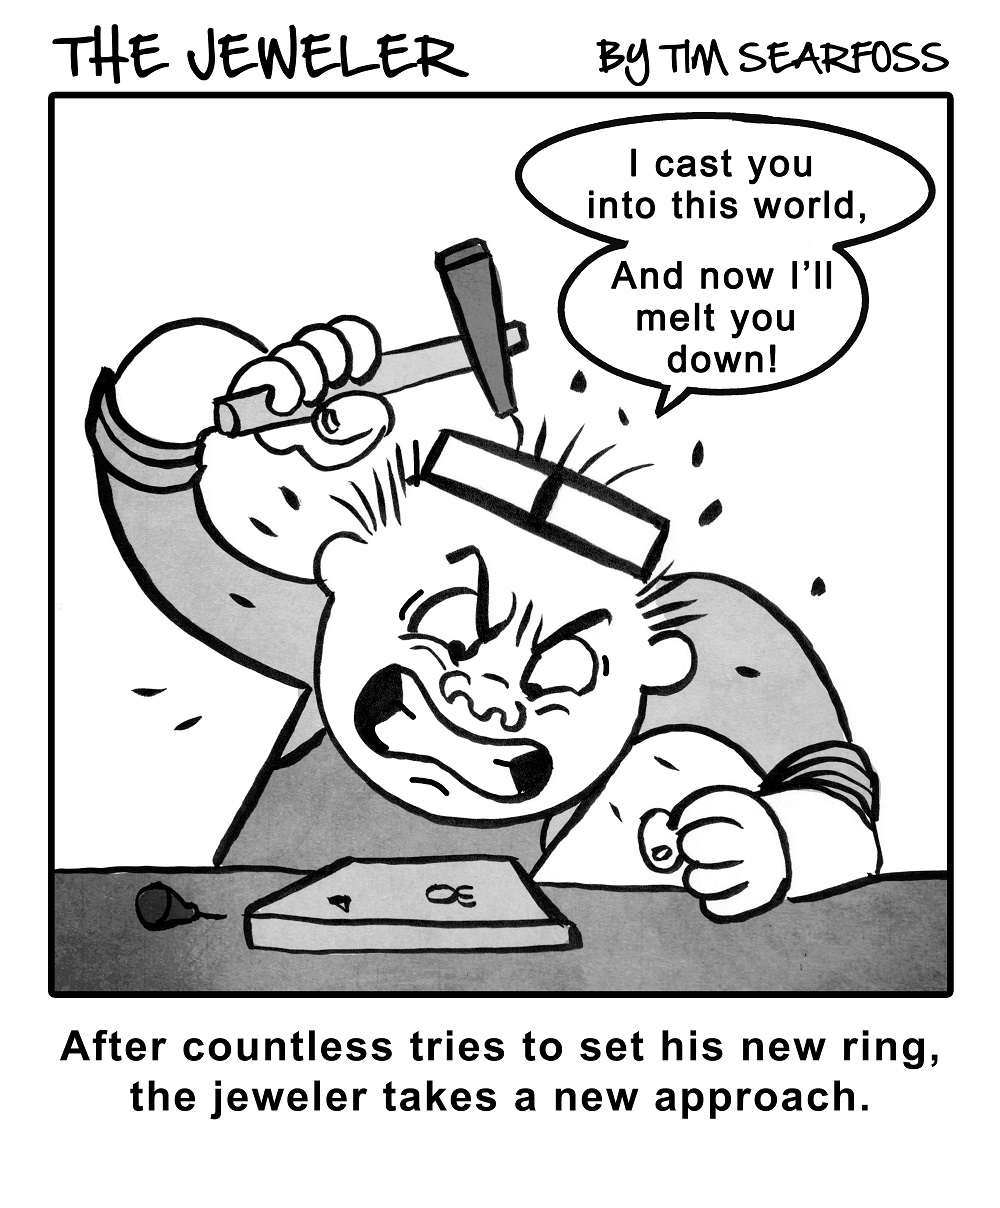 Cartoon: The Jeweler Gets Frustrated &#8230; And Now He&#8217;s On a Power Trip